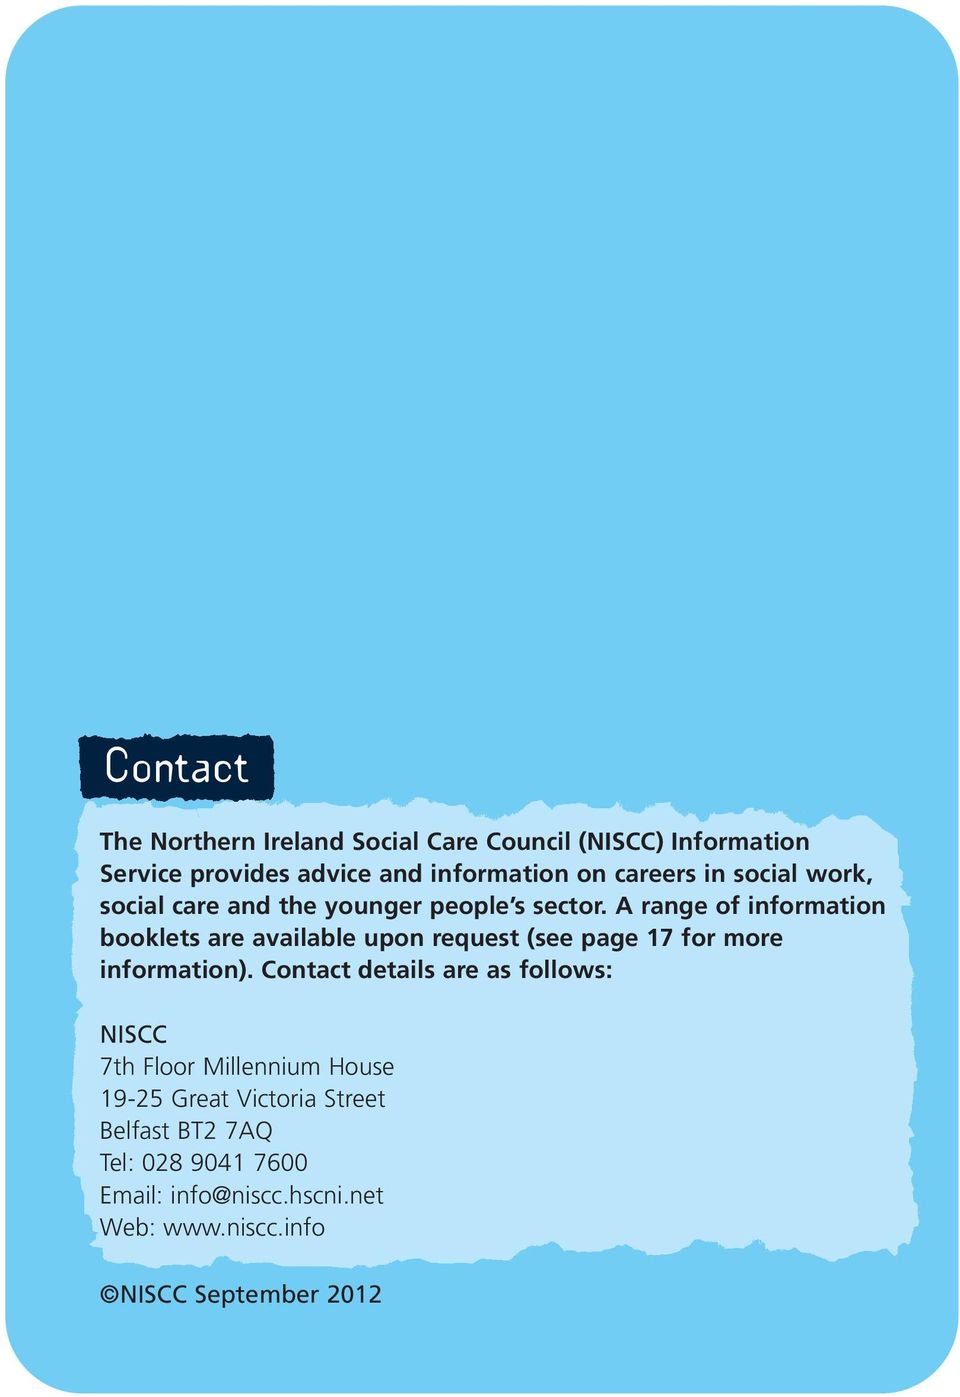 A range of information booklets are available upon request (see page 17 for more information).